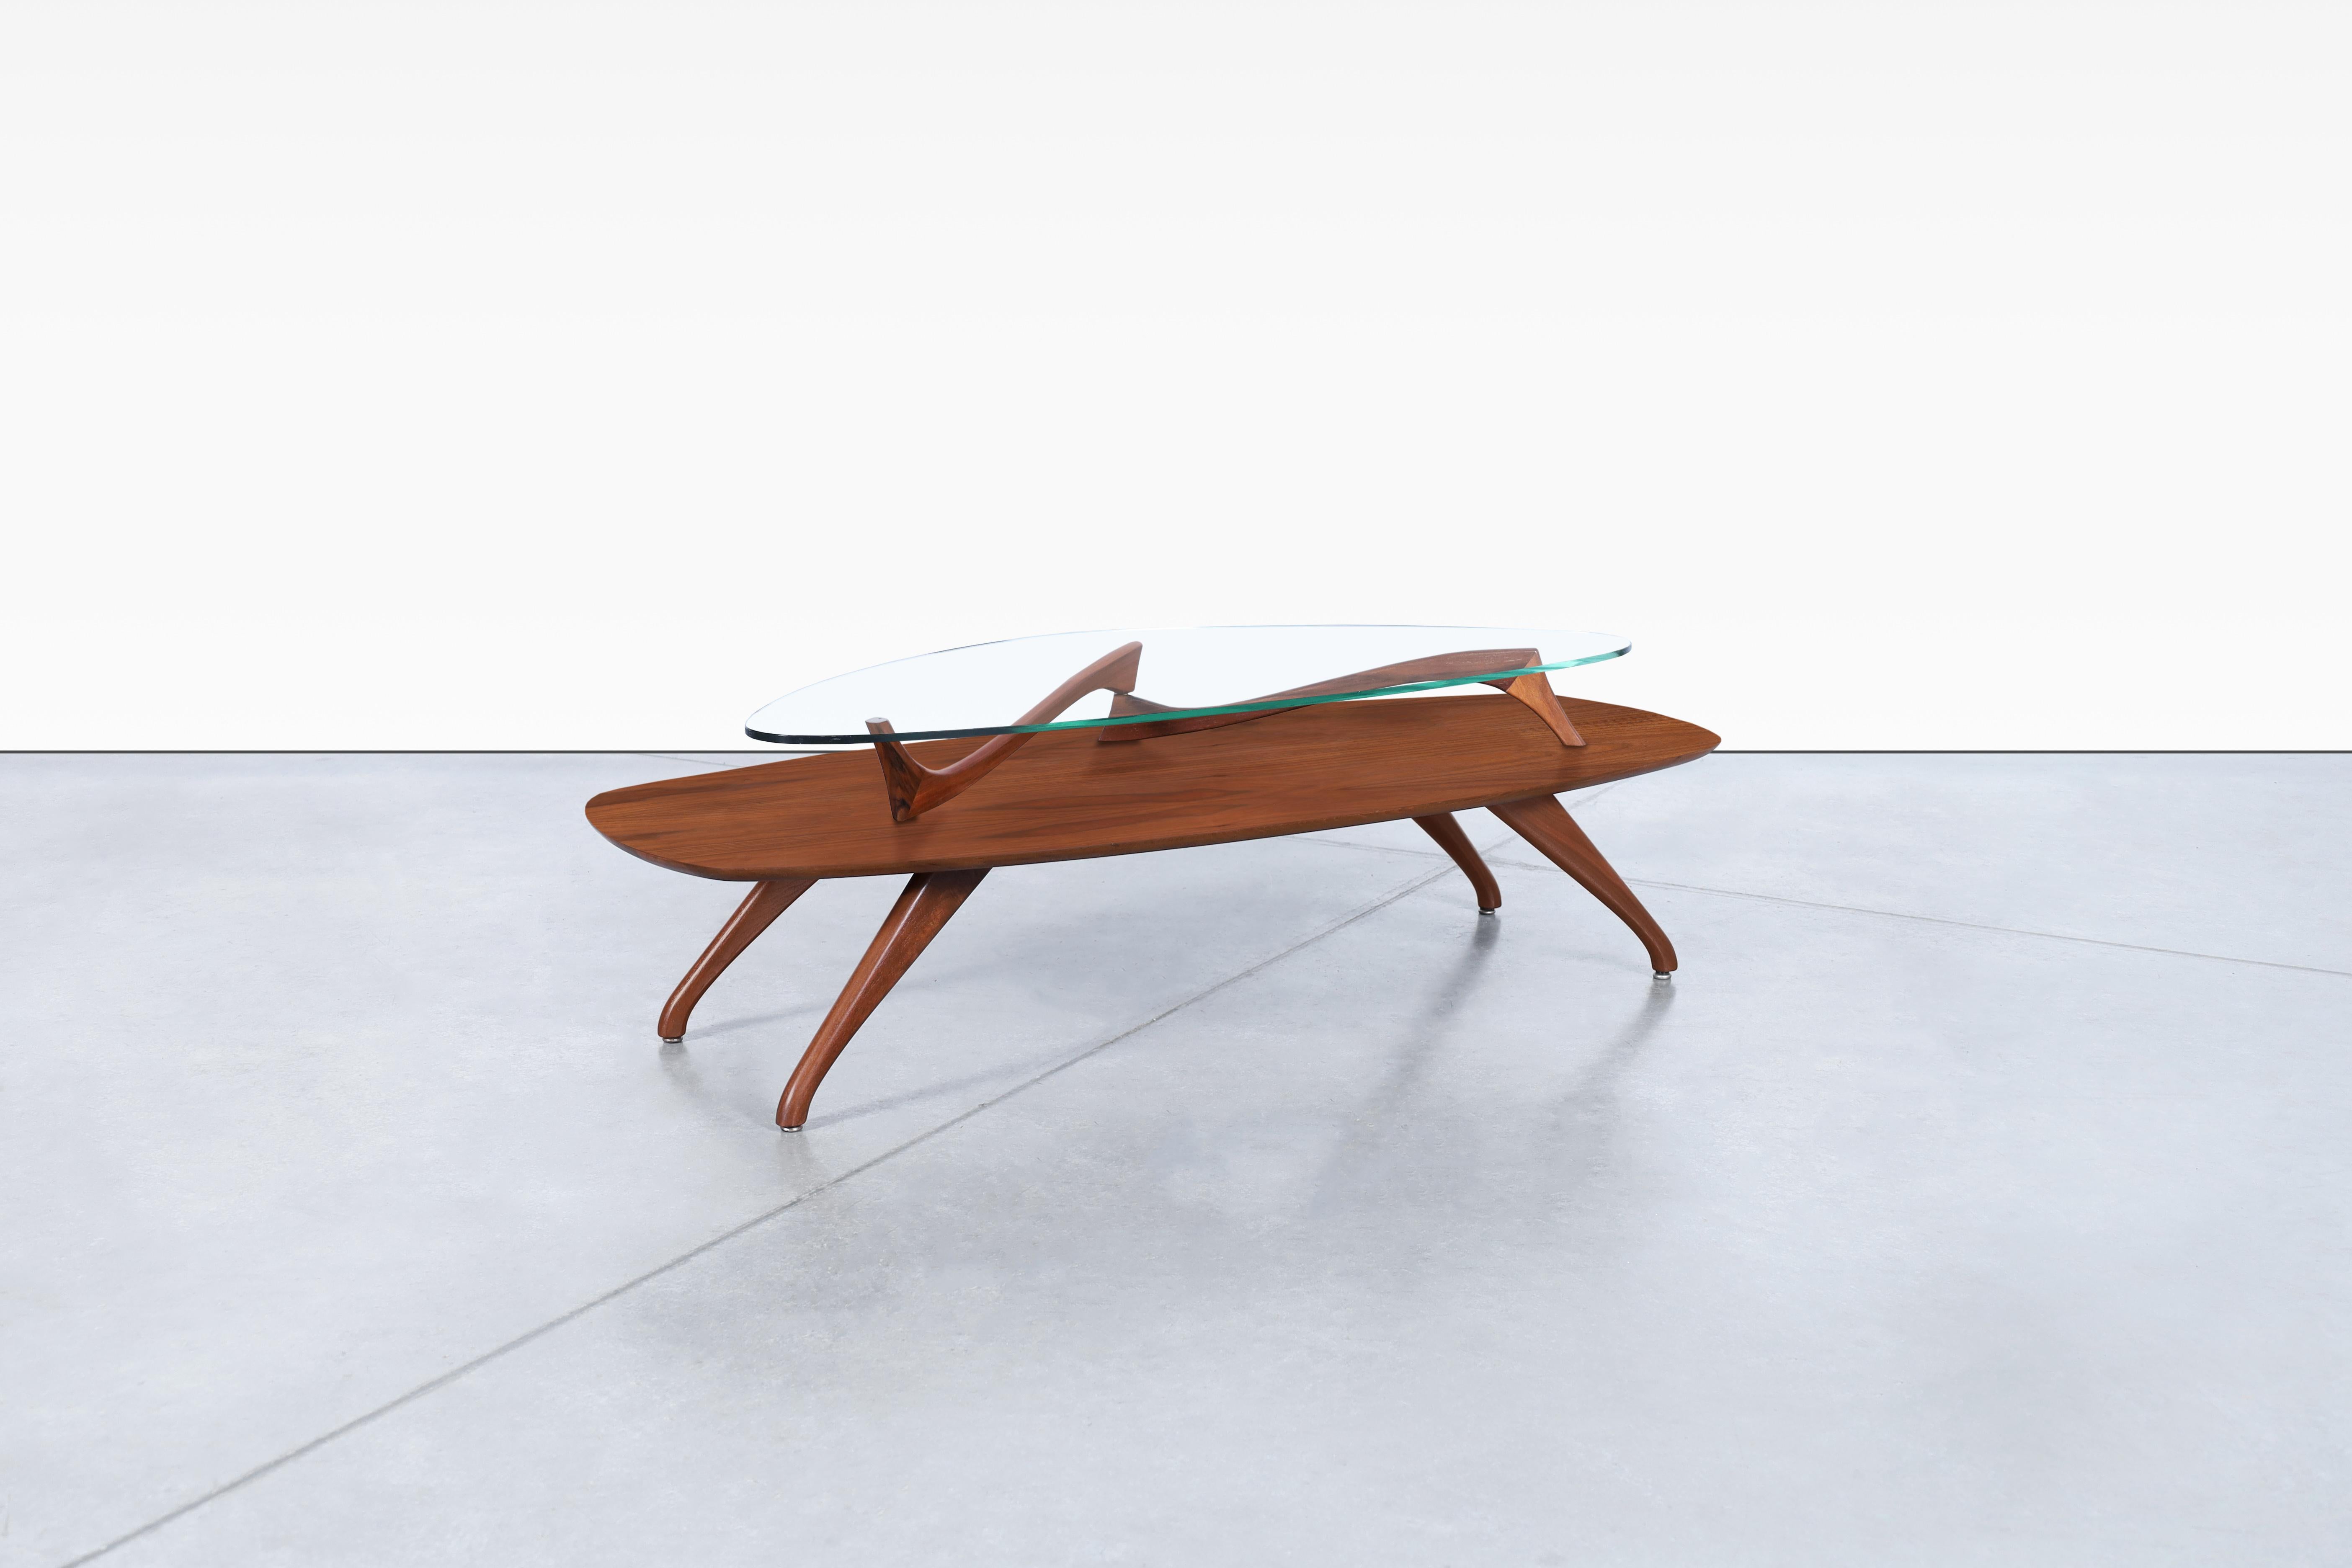 Glass Vintage Sculptural Walnut Coffee Table Styled After Vladimir Kagan For Sale